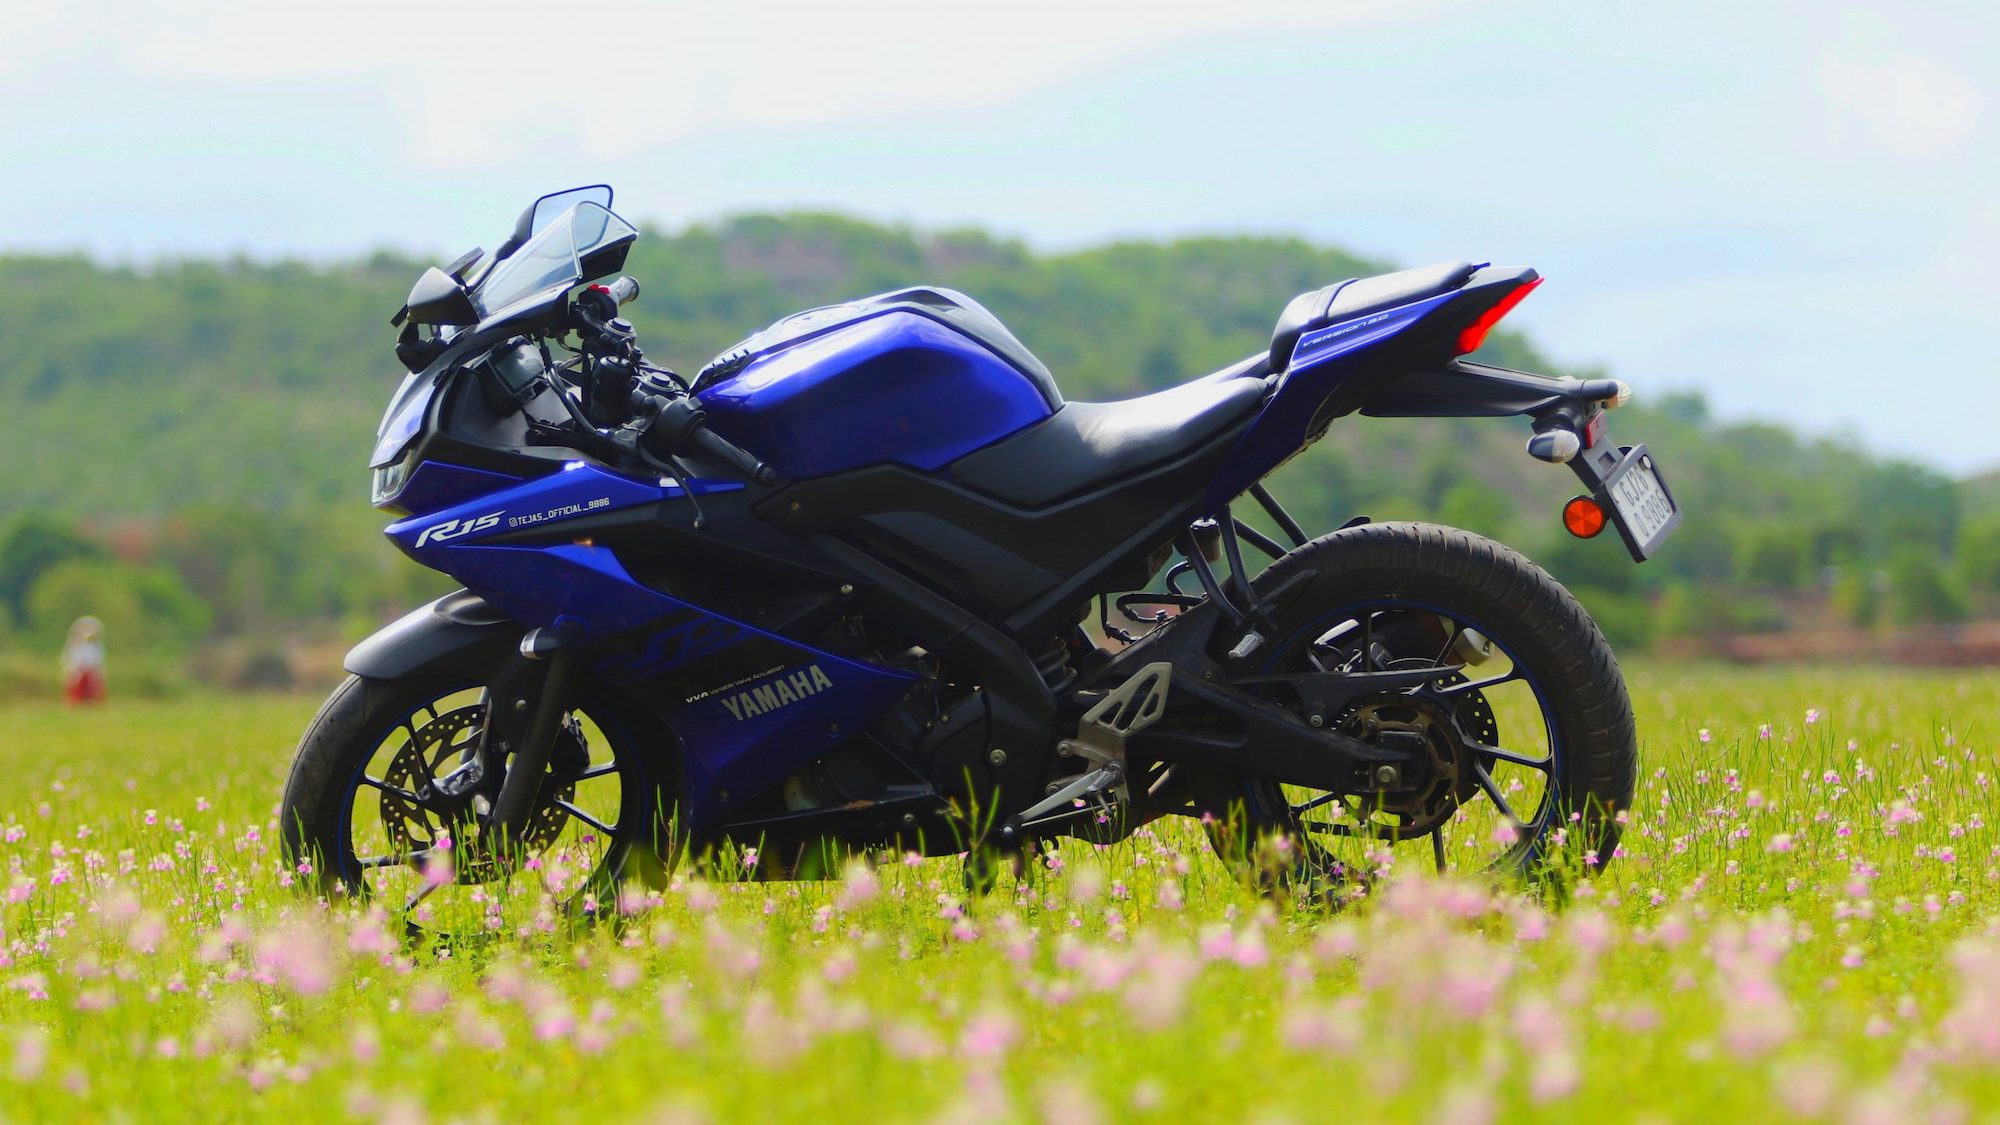 A Yamaha bike and rider in the pasture.  Media sourced from PixaHive.